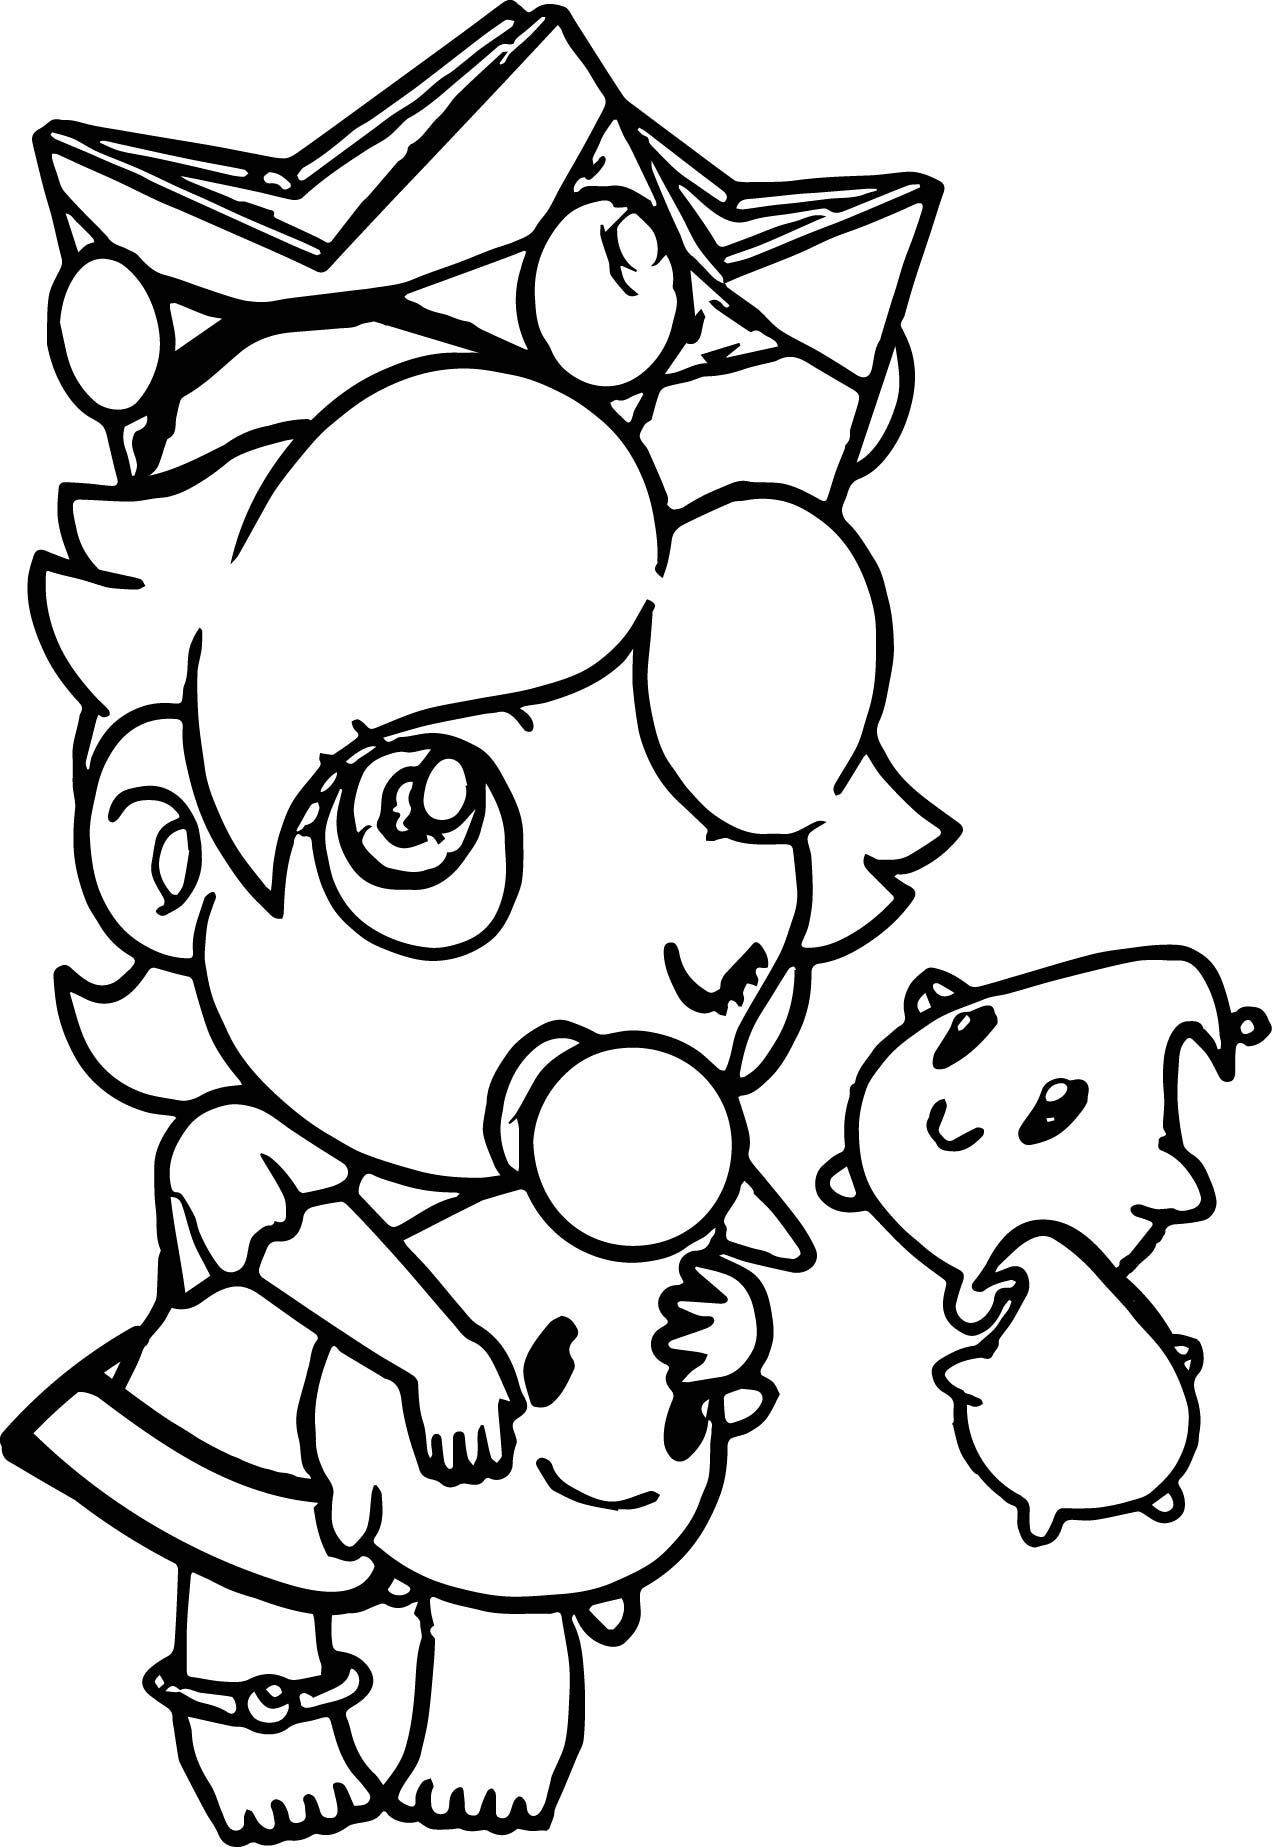 Baby Rosalina Peach Daisy And Rosalina As Babies Coloring pour Coloriage Peach 